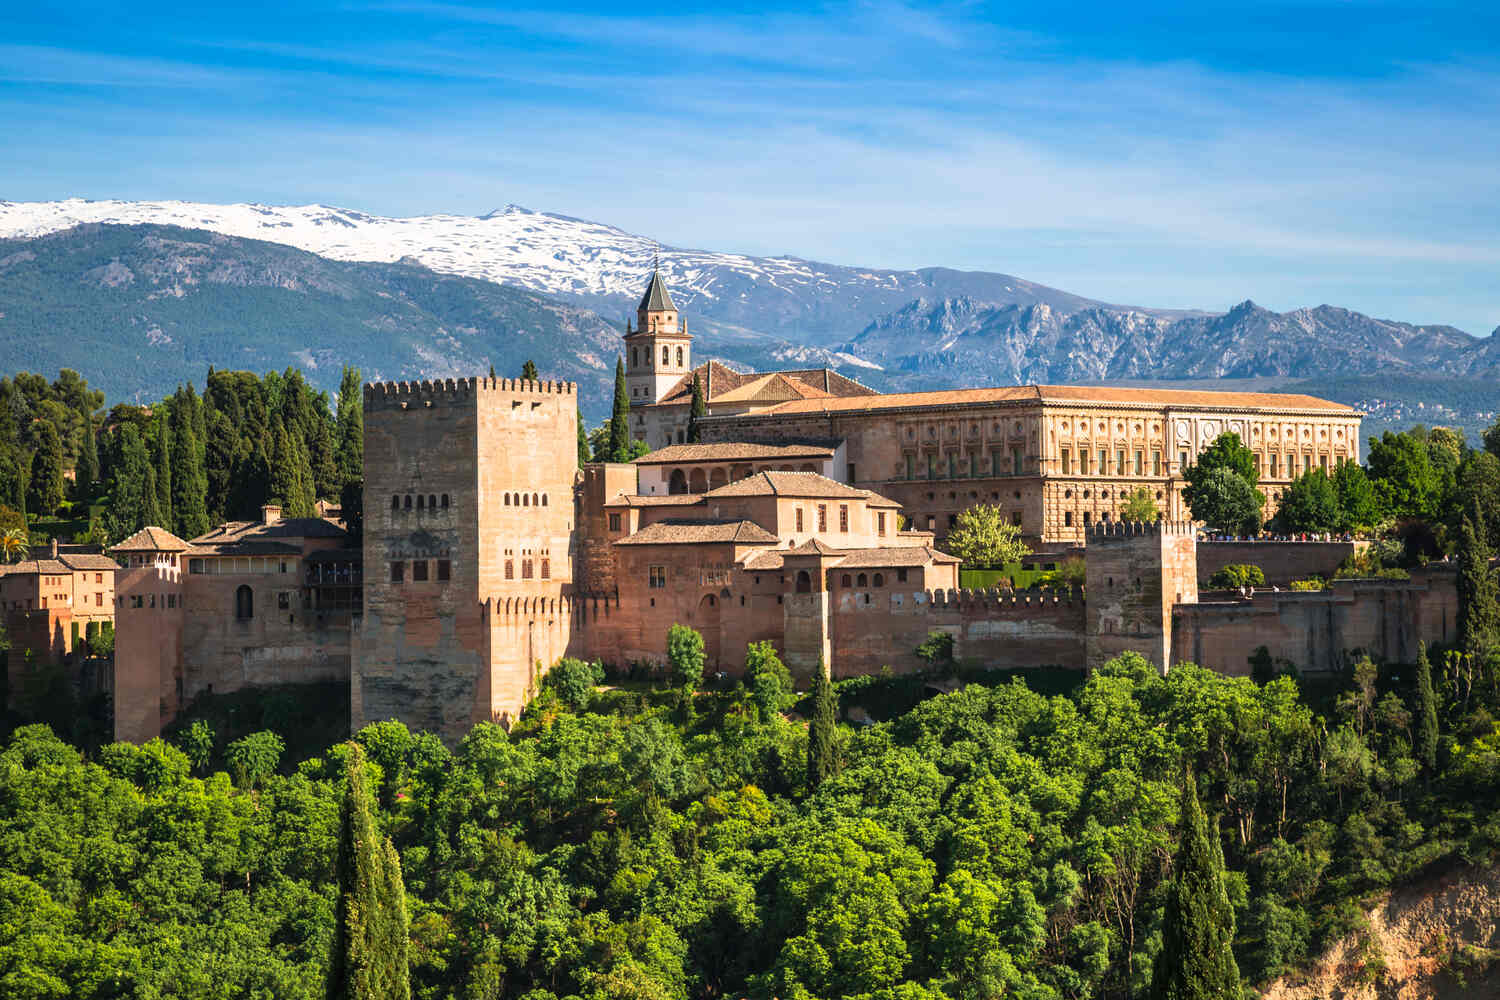 Alhambra on a Seville Day Trip to Granada, Aerial view of Alhambra palace with snow-capped Sierra Nevada mountains behind.